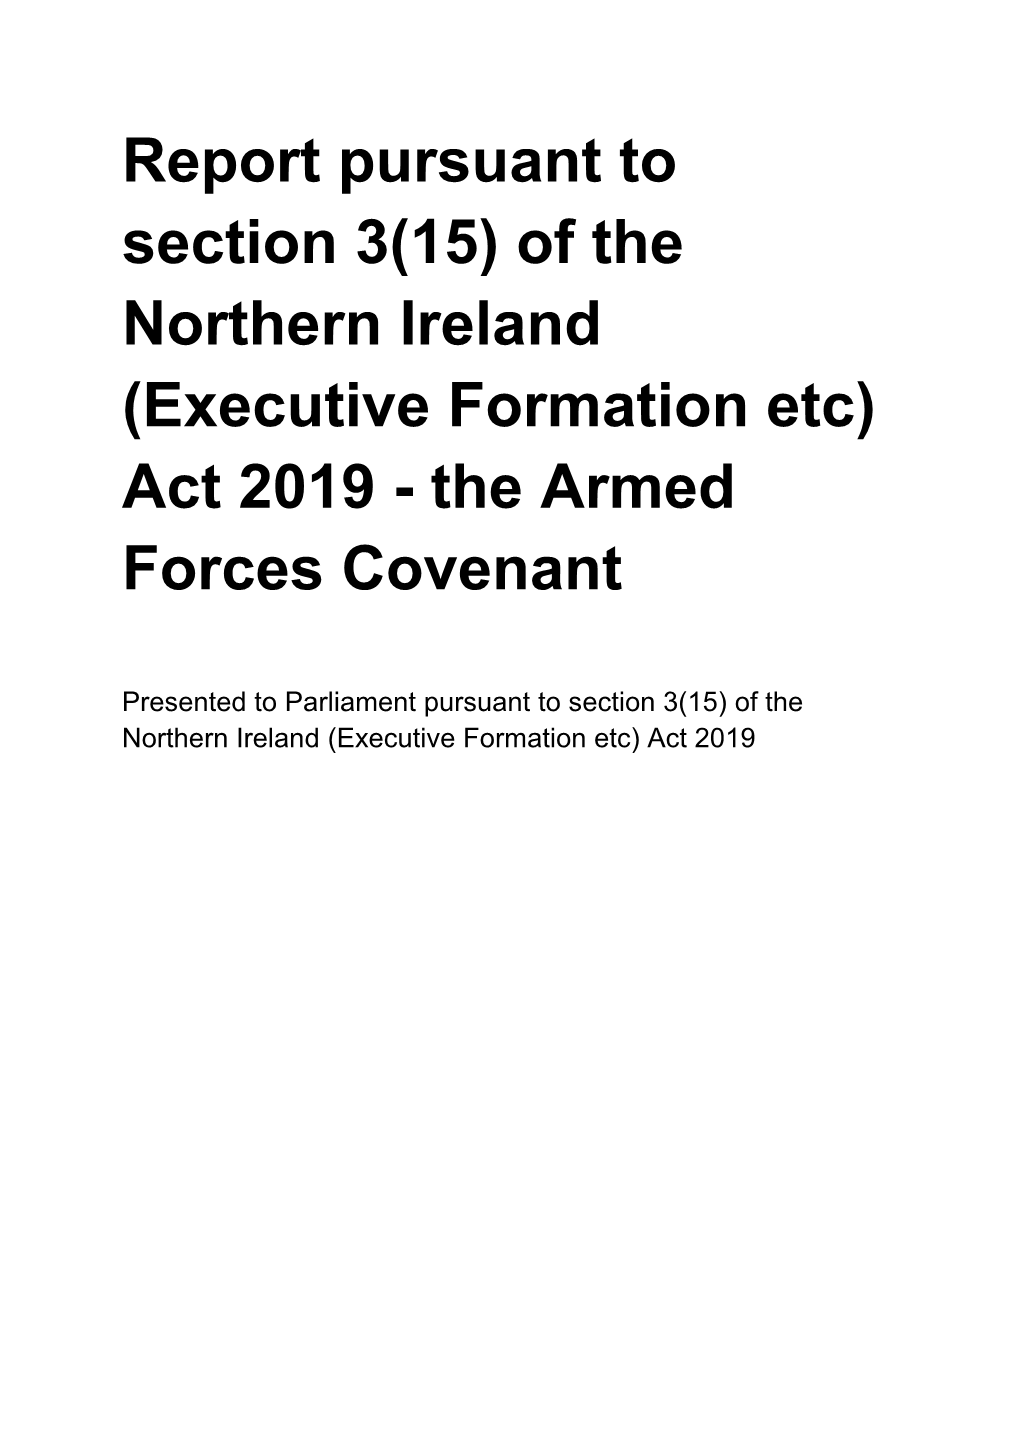 Of the Northern Ireland (Executive Formation Etc) Act 2019 - the Armed Forces Covenant